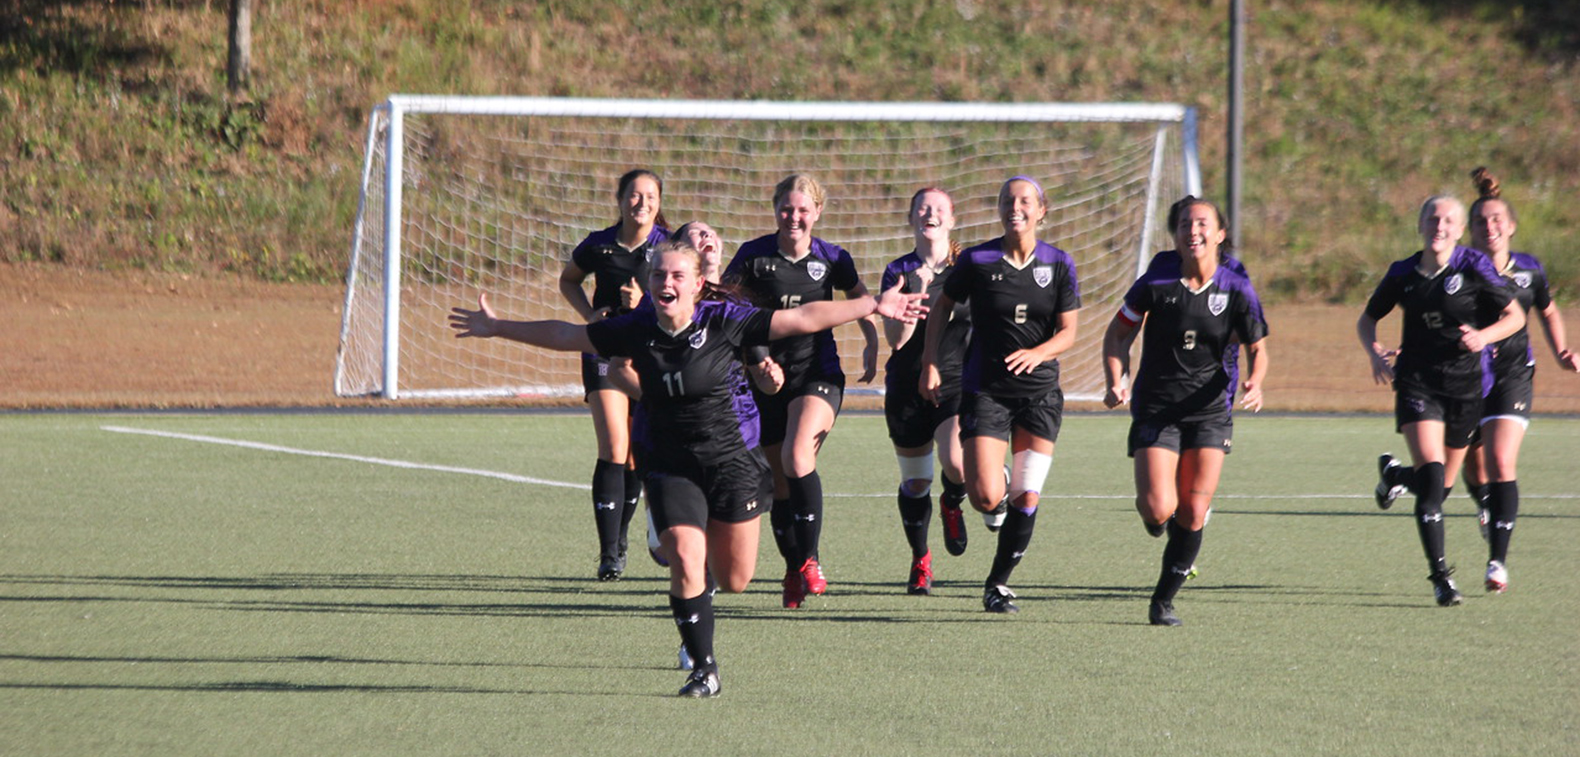 Bruins down Viterbo, qualify for Nationals on Nolte’s golazo